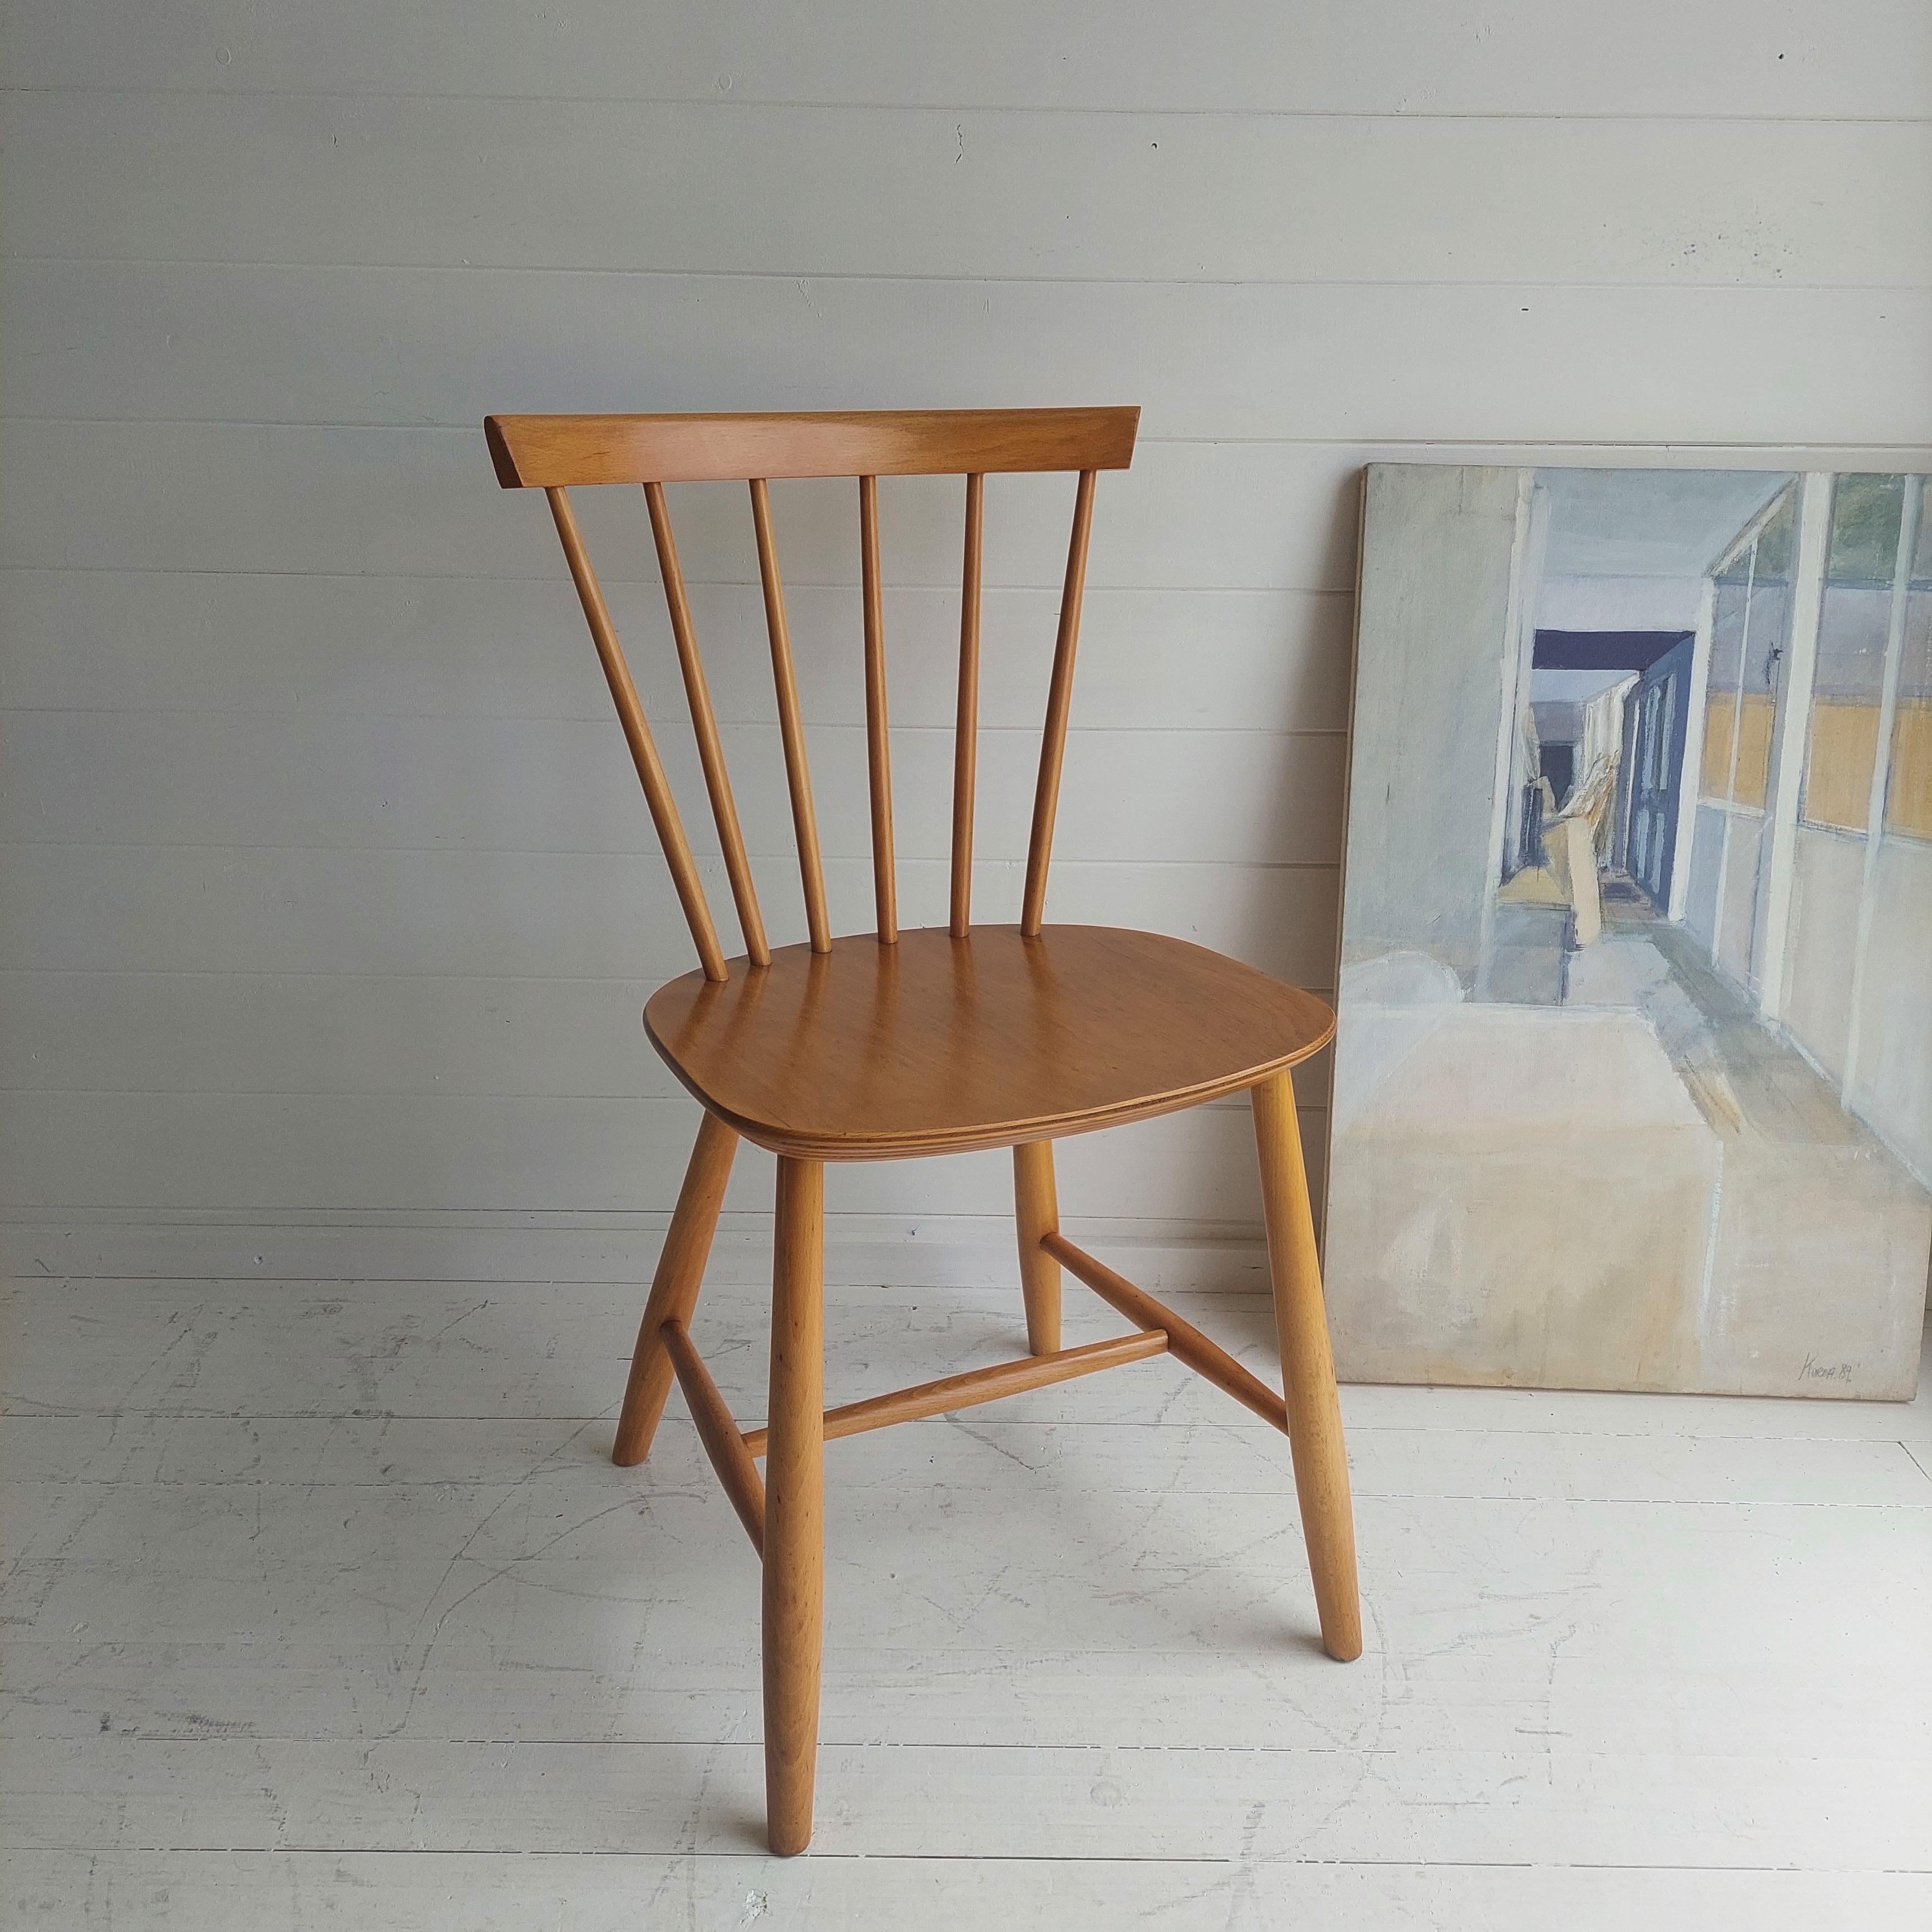 20th Century Mid Century J46 Dining Kitchen Chair by Poul Volther for Fdb, Denmark, 1960s